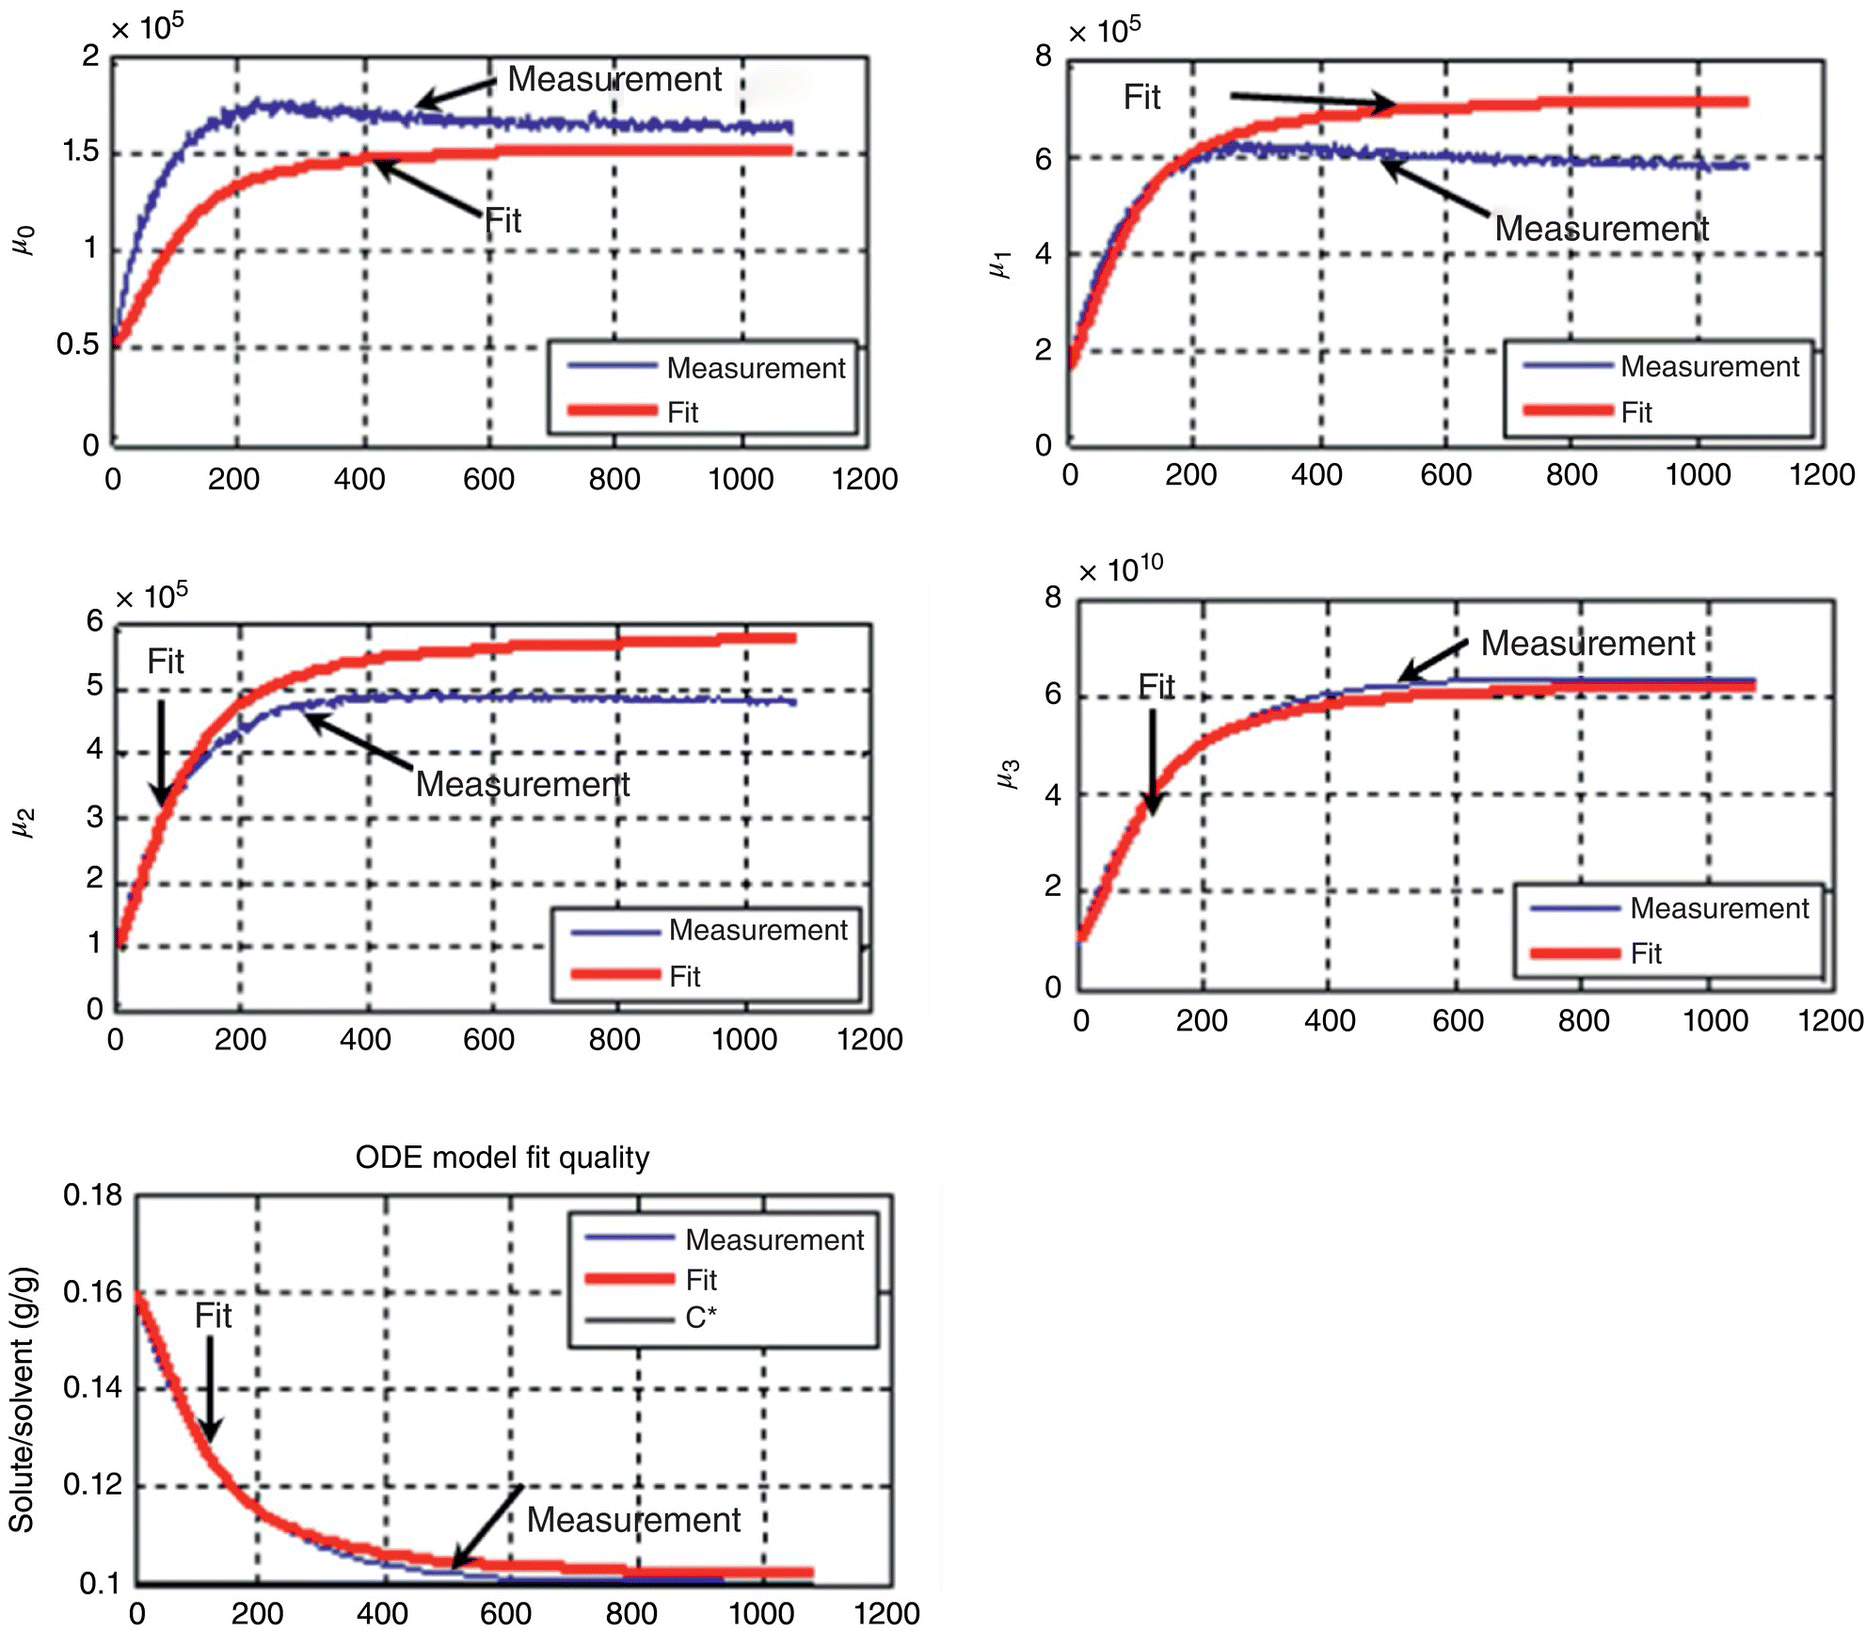 5 Graphs for μ0, μ1, μ2, μ3, and solute/solvent. Each has 2 curves in light and dark shades indicated by arrows as fit and measurement, respectively.